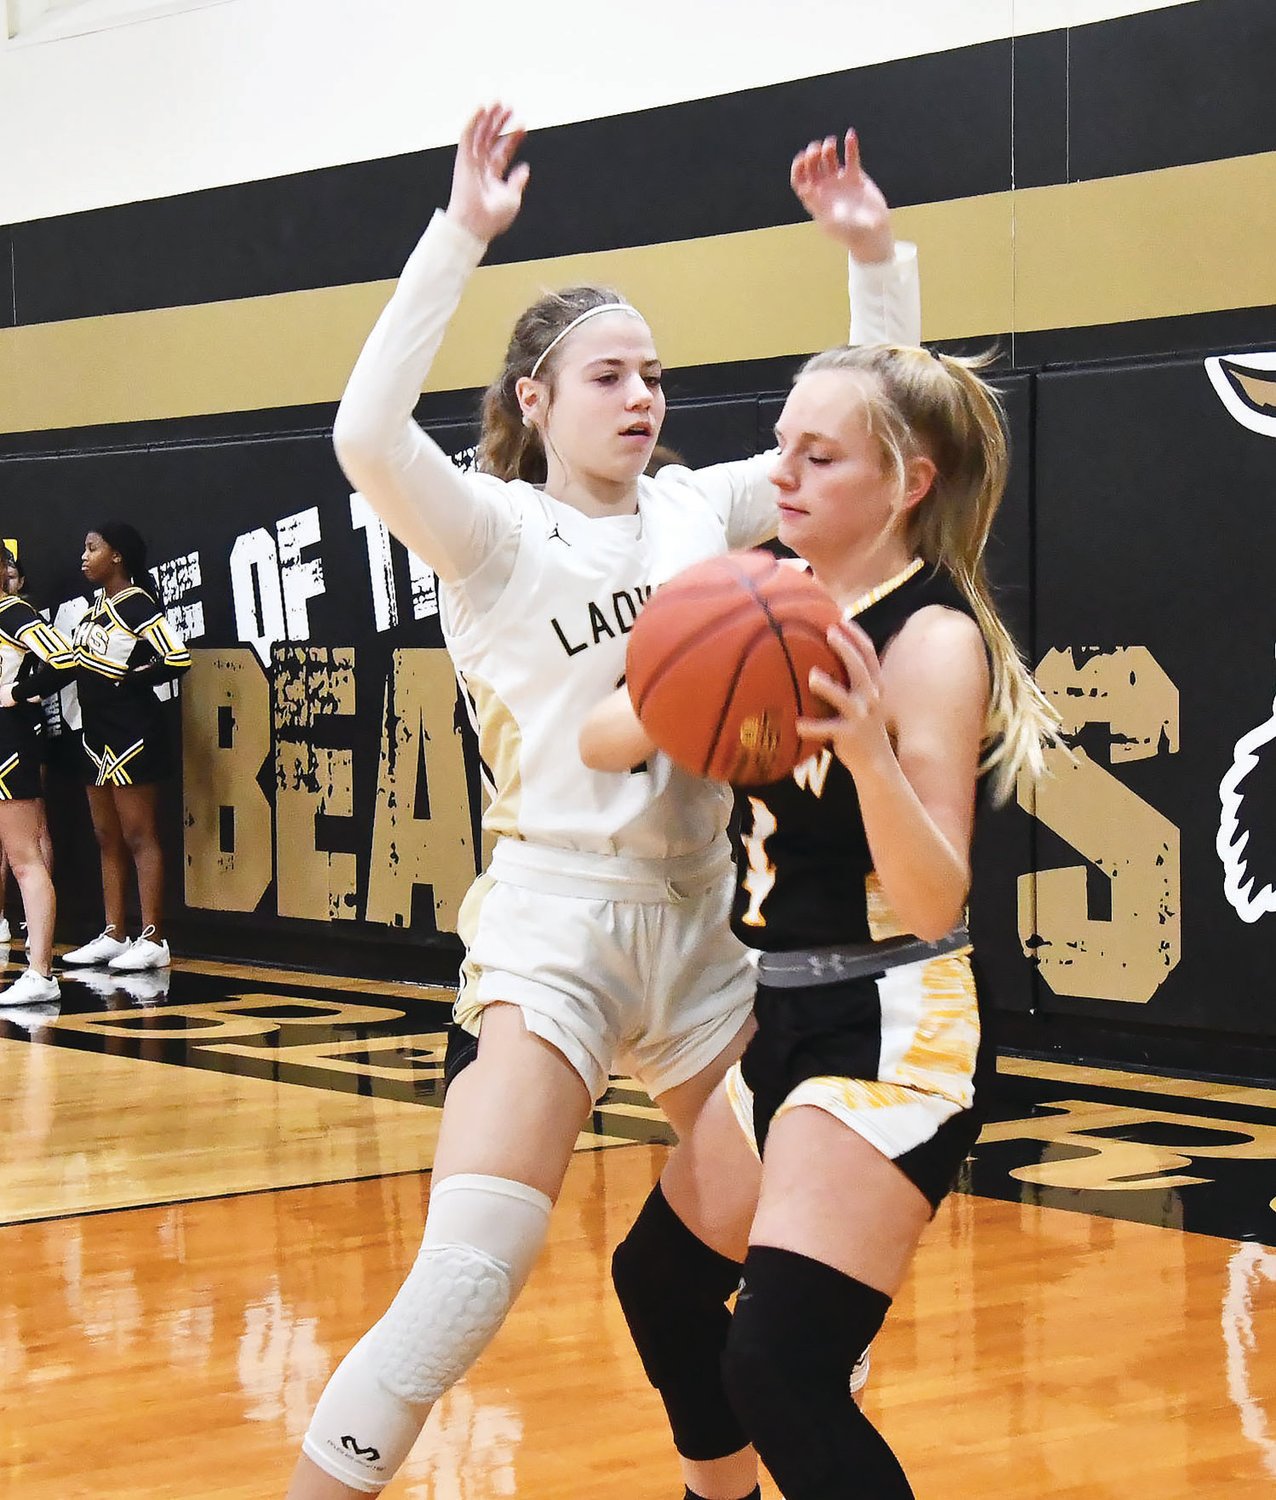 Olivia Cross plays tough defense on Macie Parks from Glasgow during a Central Activities Conference game in Cairo on Thursday, Jan. 12.